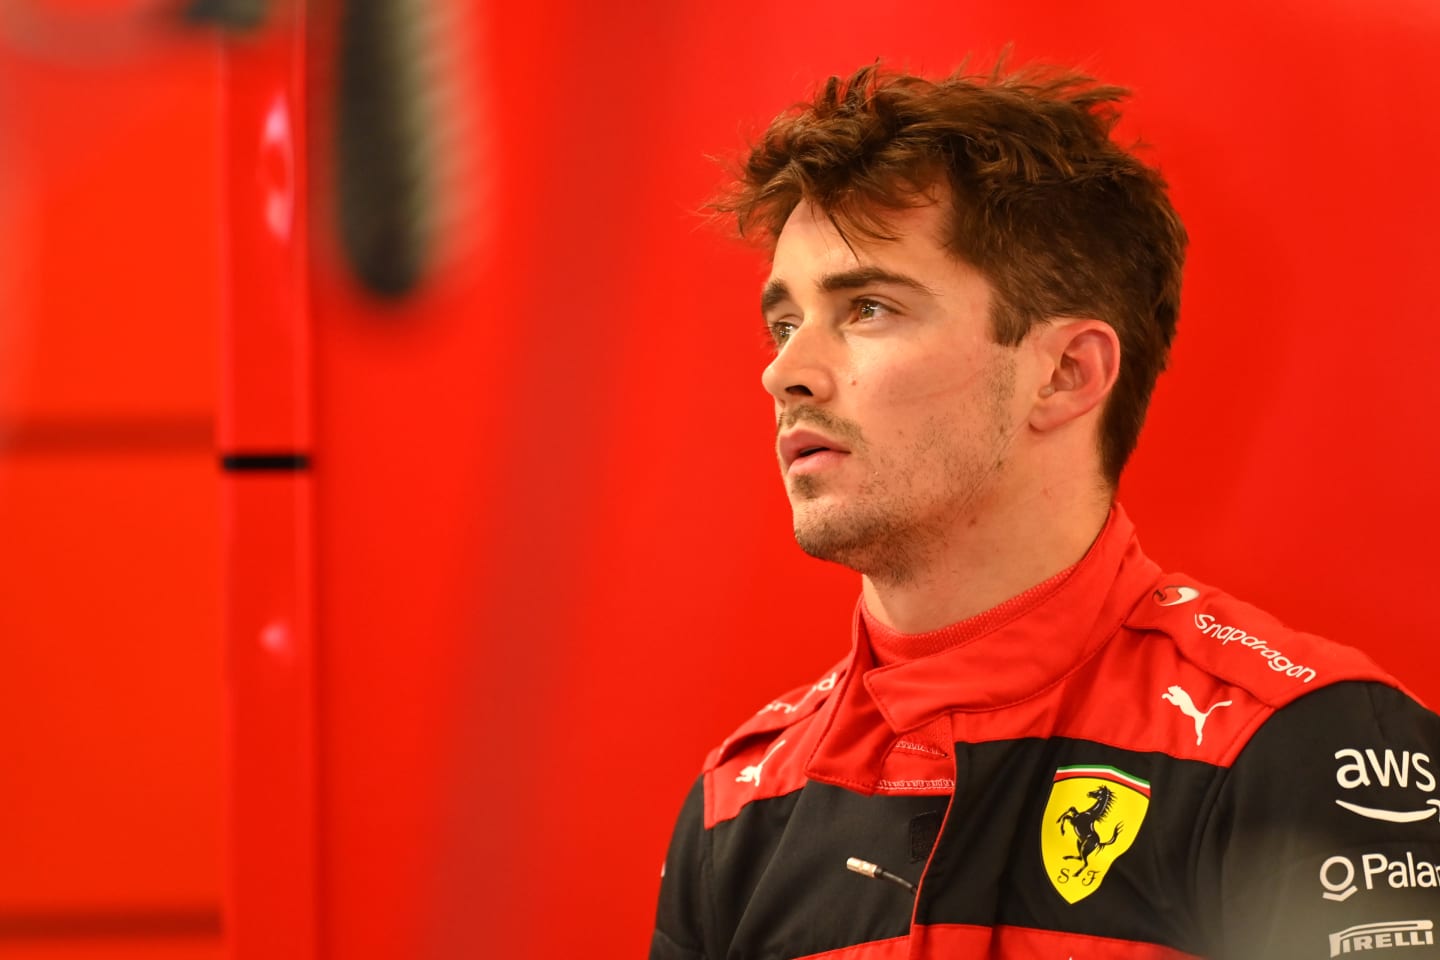 BUDAPEST, HUNGARY - JULY 30: Charles Leclerc of Monaco and Ferrari looks on in the garage during